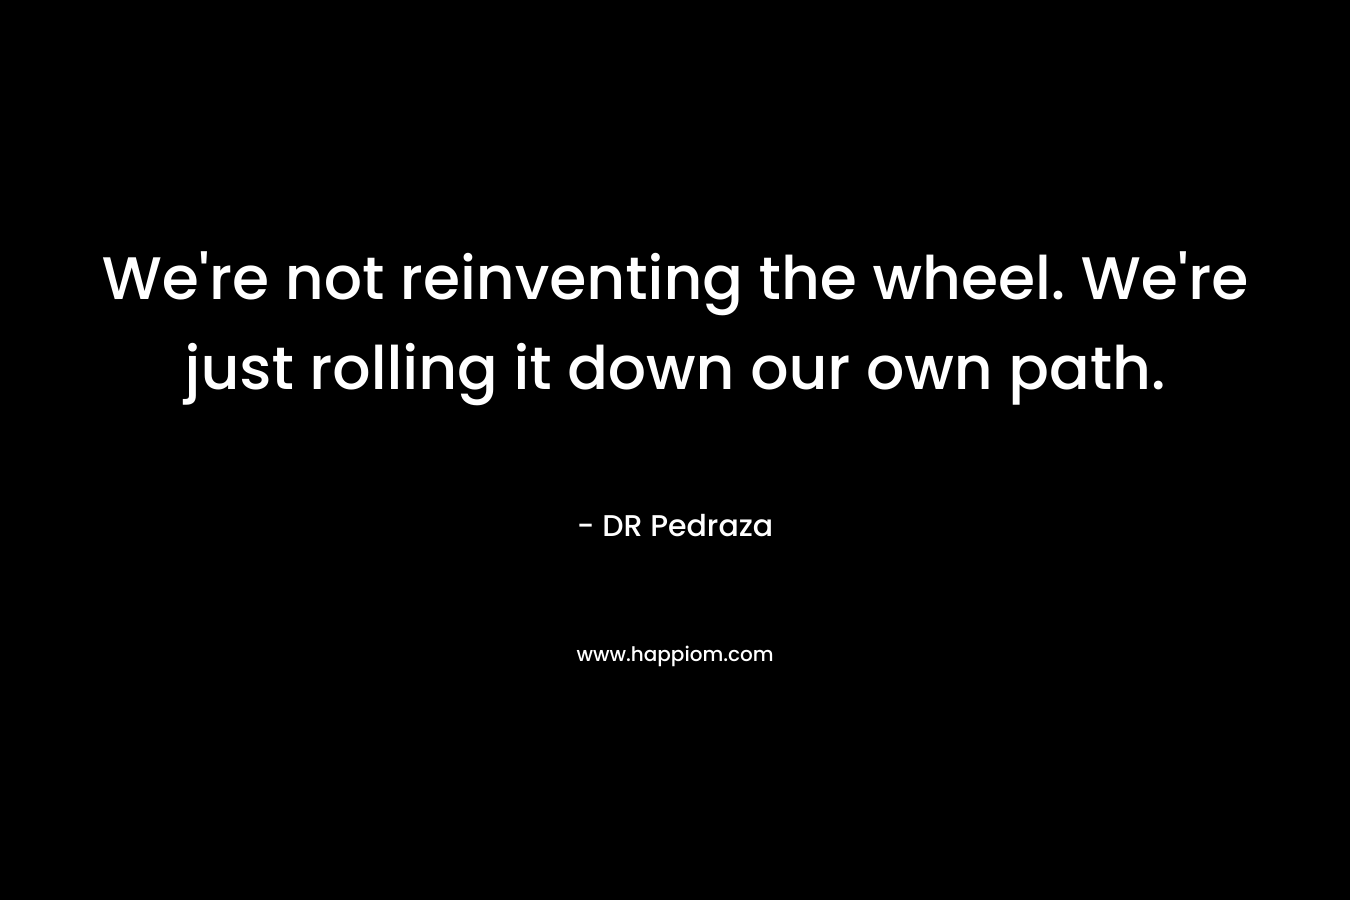 We’re not reinventing the wheel. We’re just rolling it down our own path. – DR Pedraza